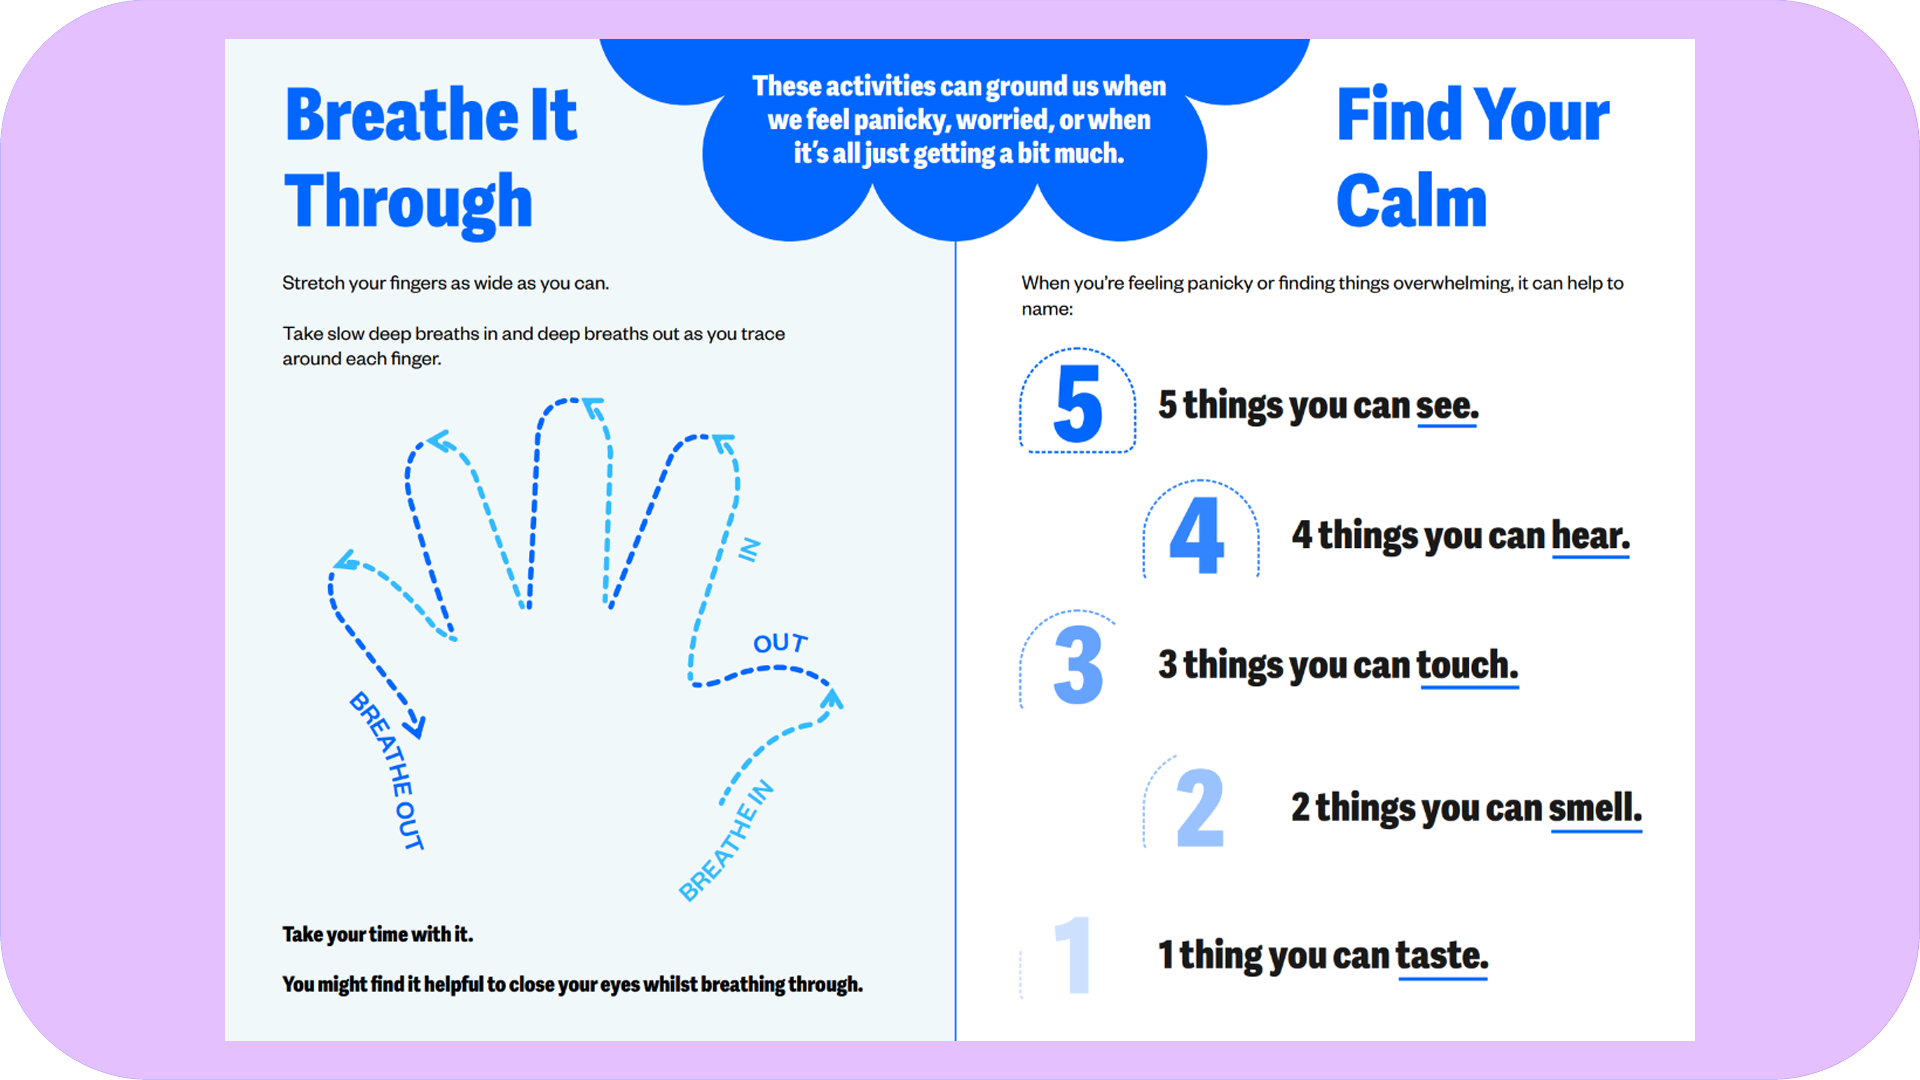 A preview of the resource showing a hand for breathing and 5 things to do to find your calm.